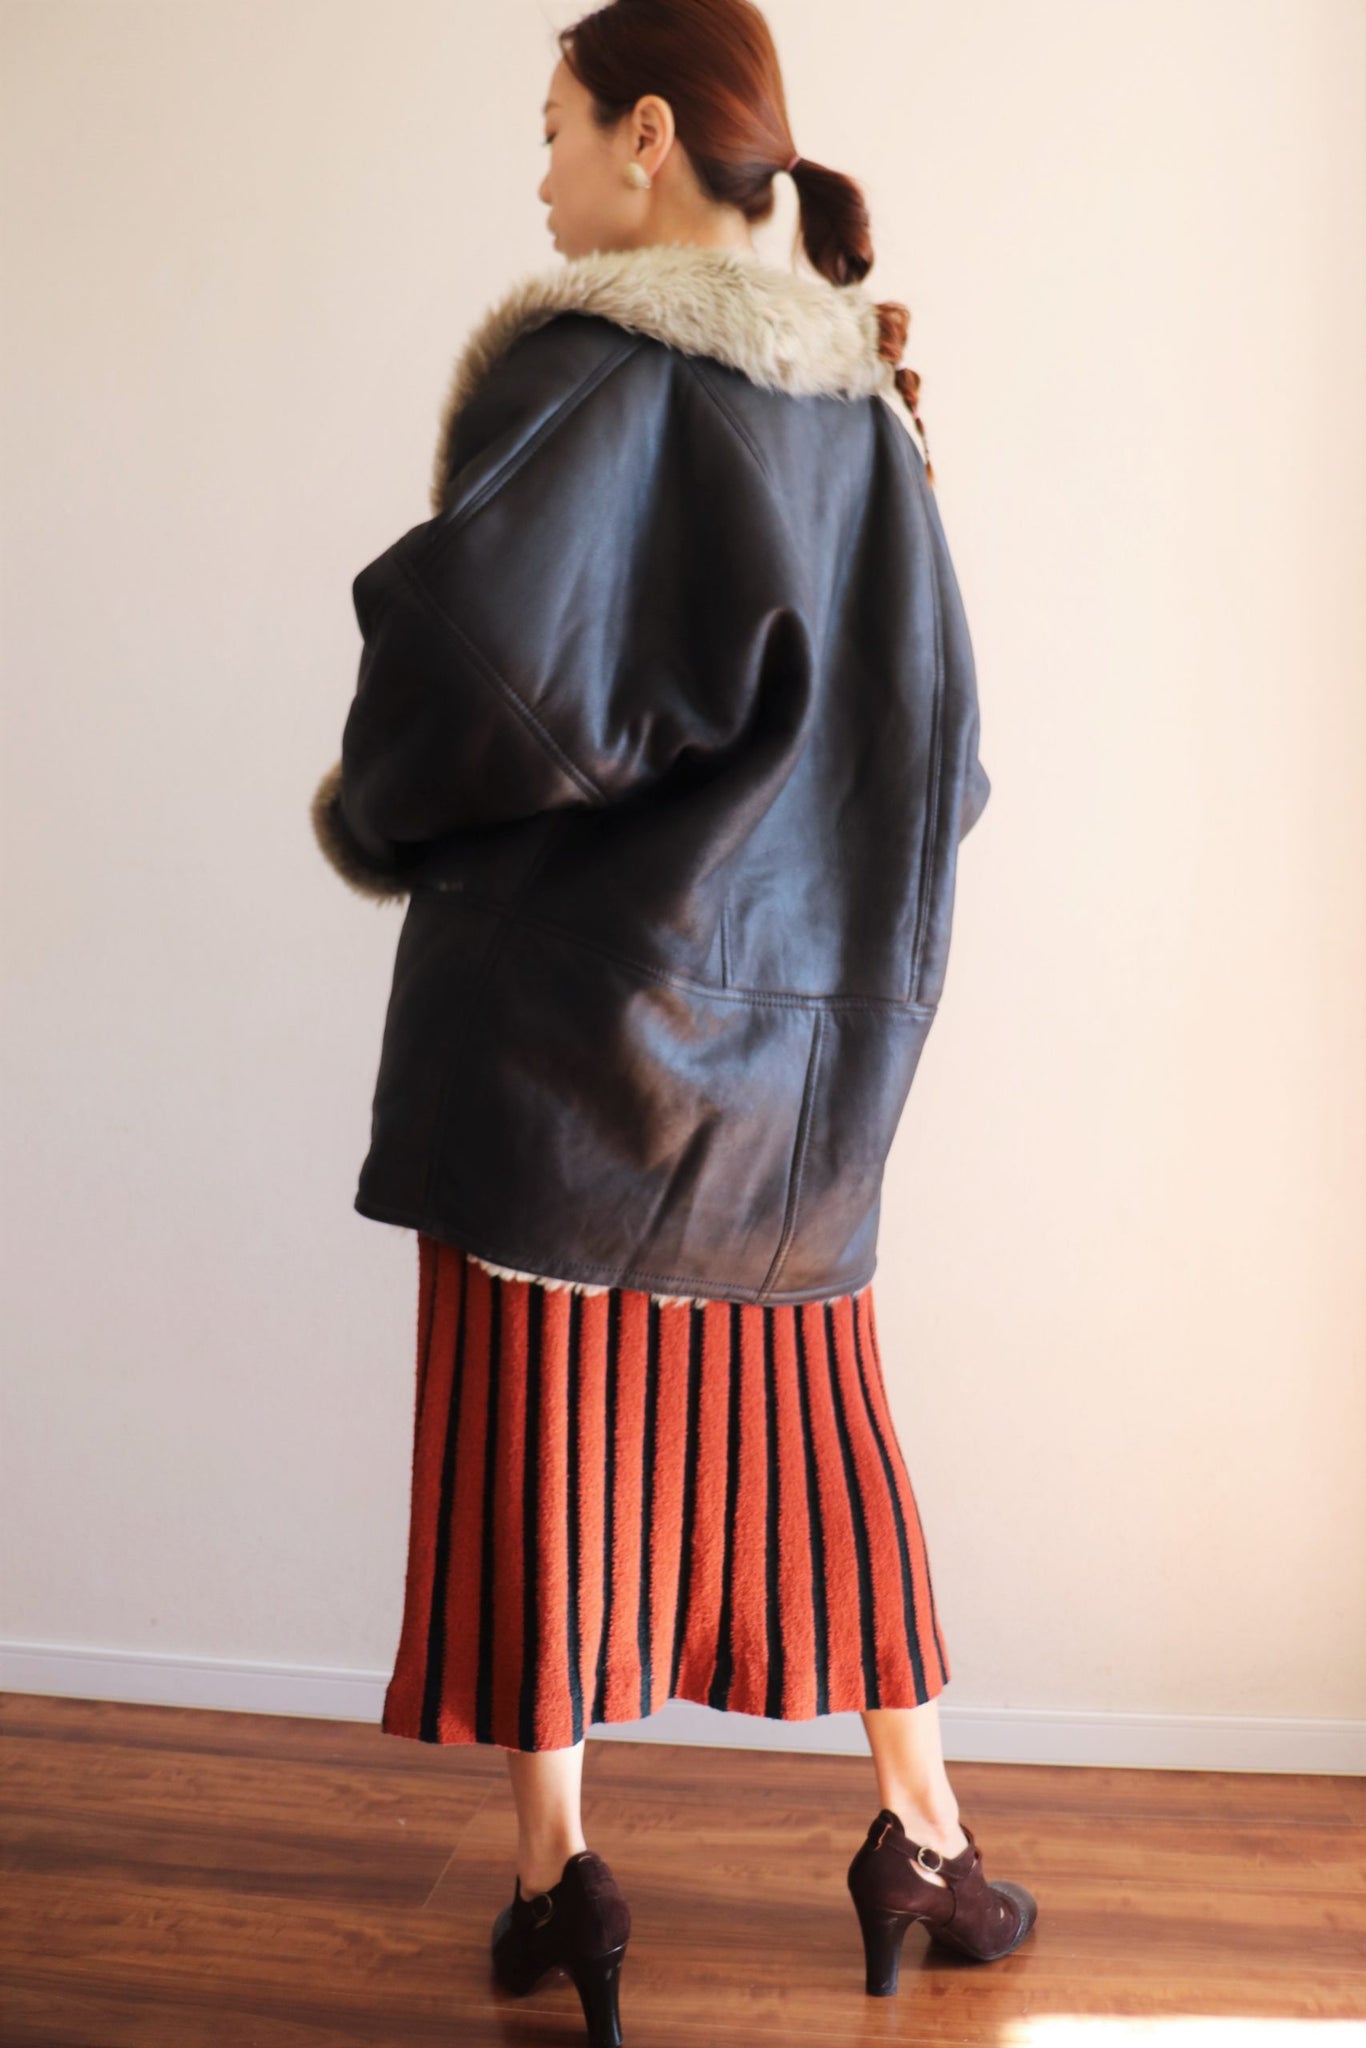 80s Shearling Leather Jacket